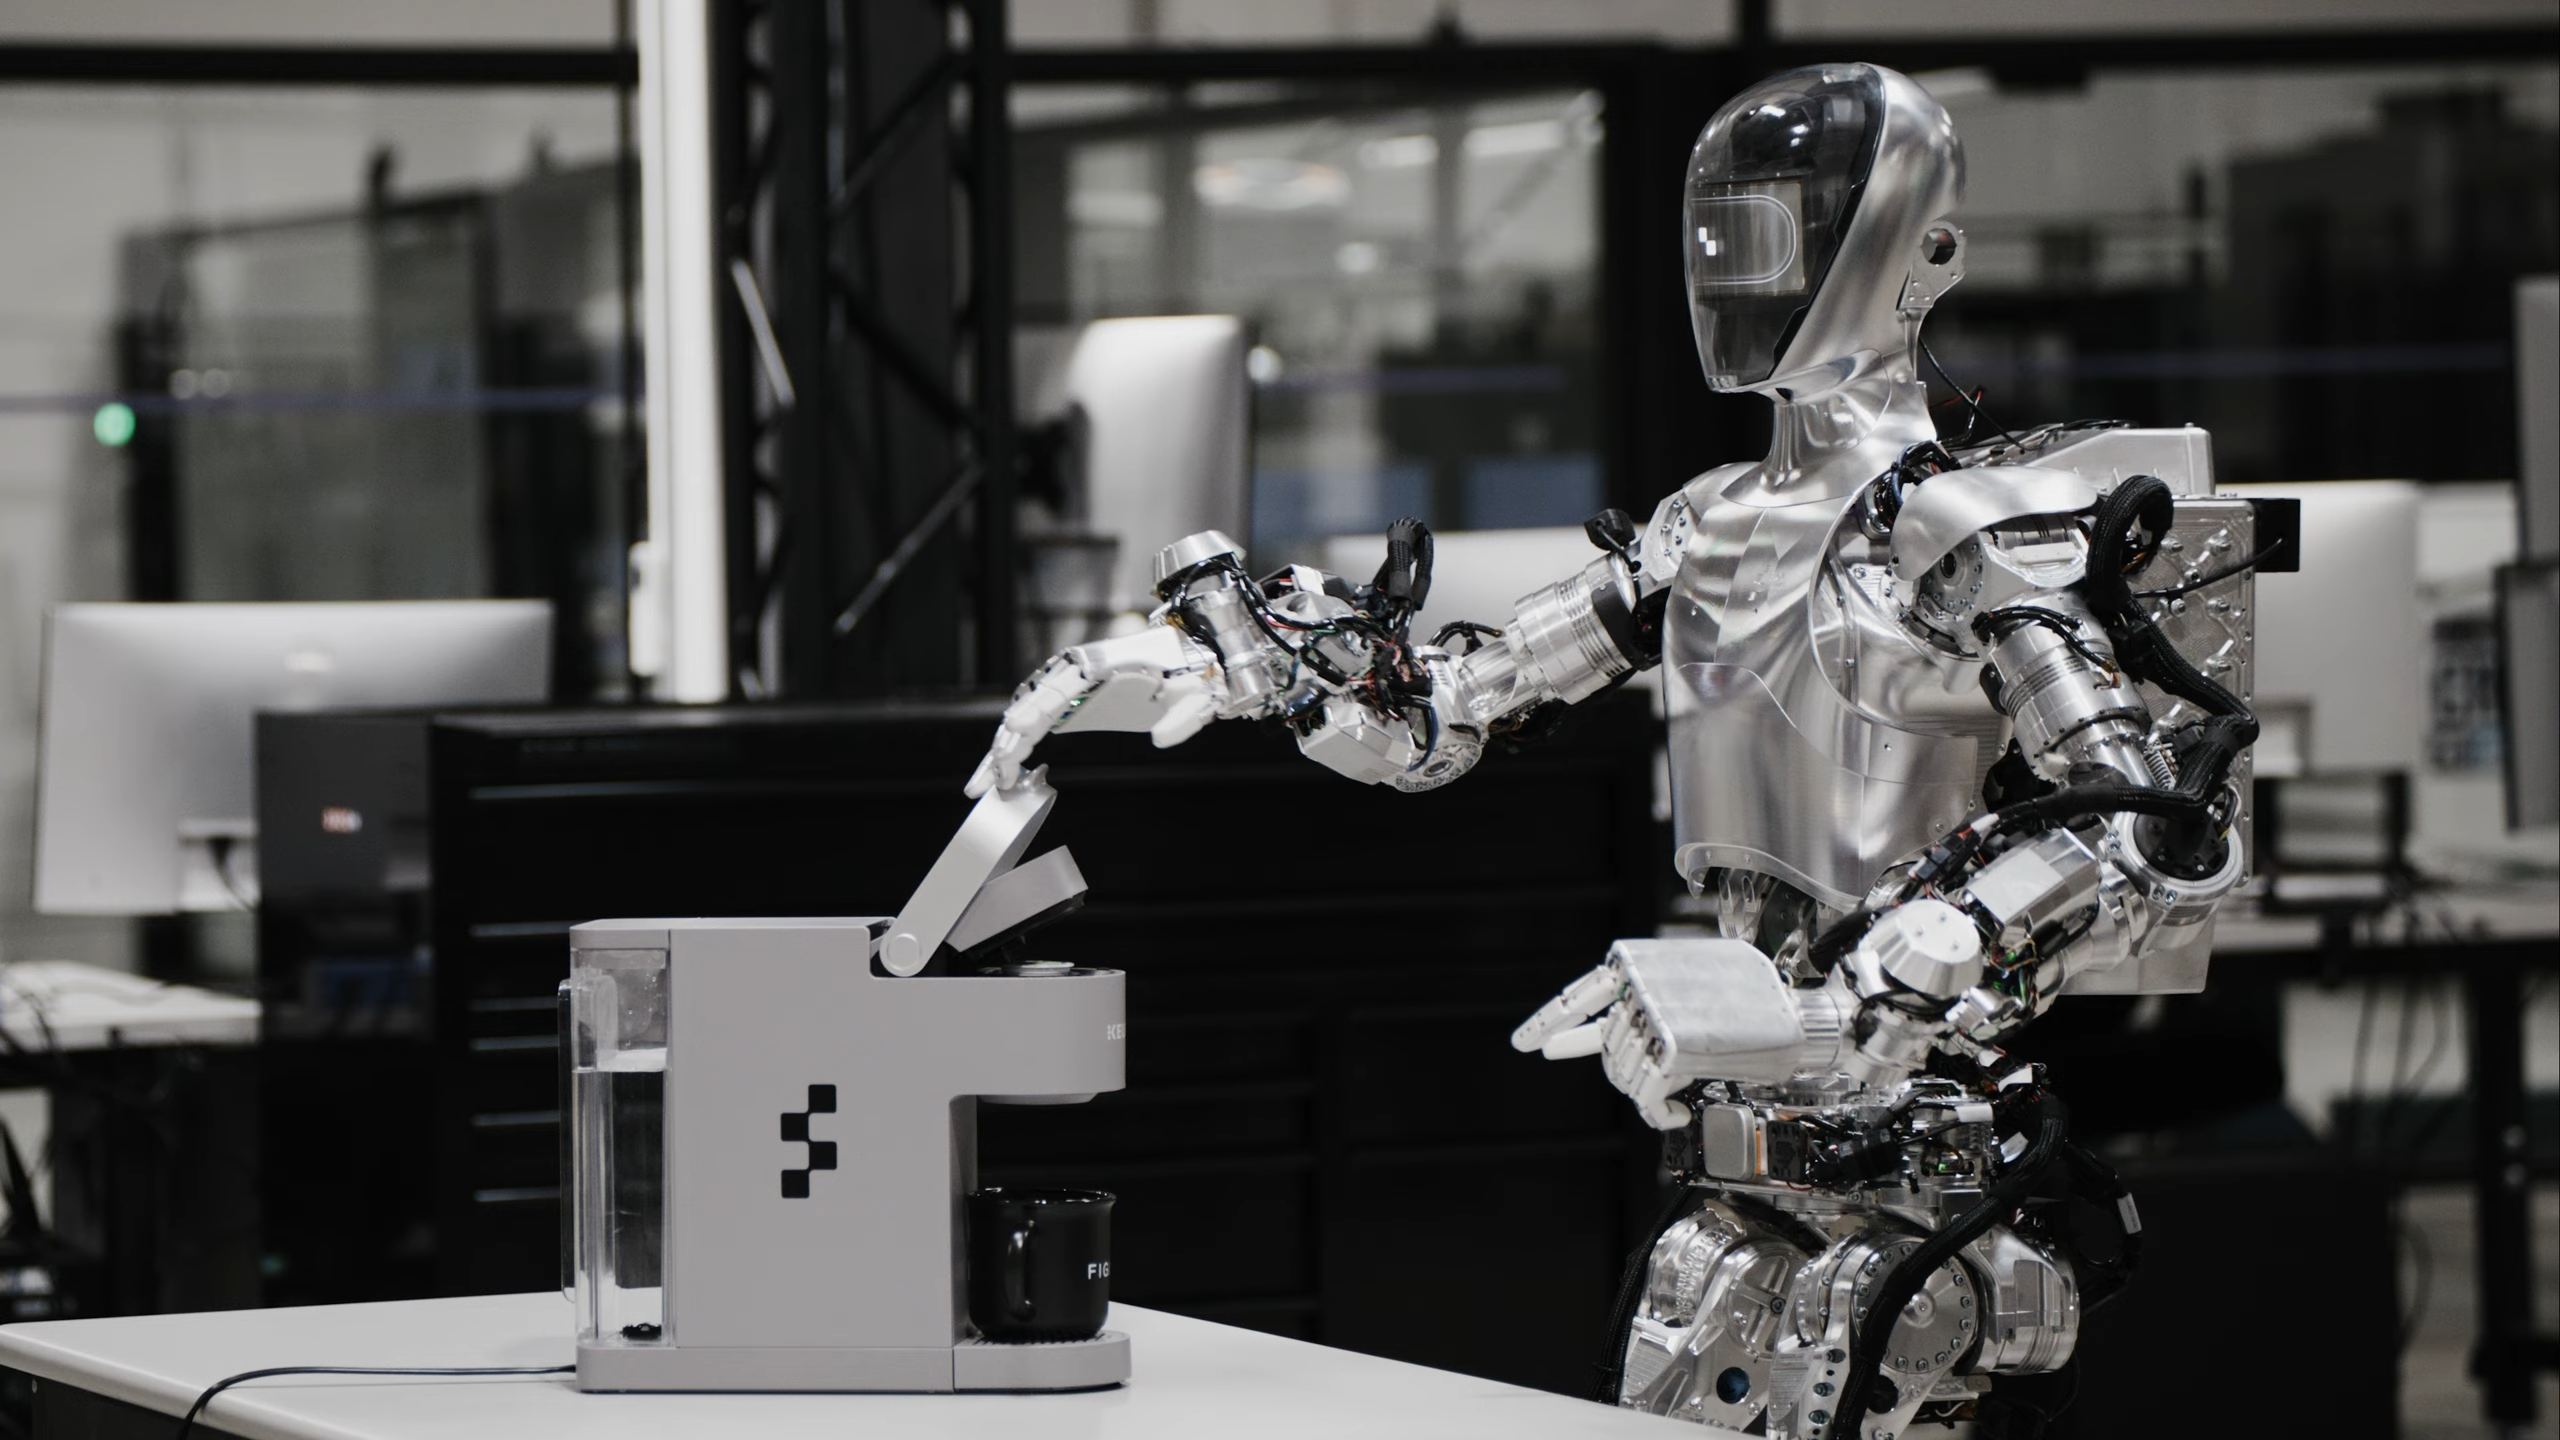 A photograph of a silvery humanoid robot placing a pod into a Keurig machine.